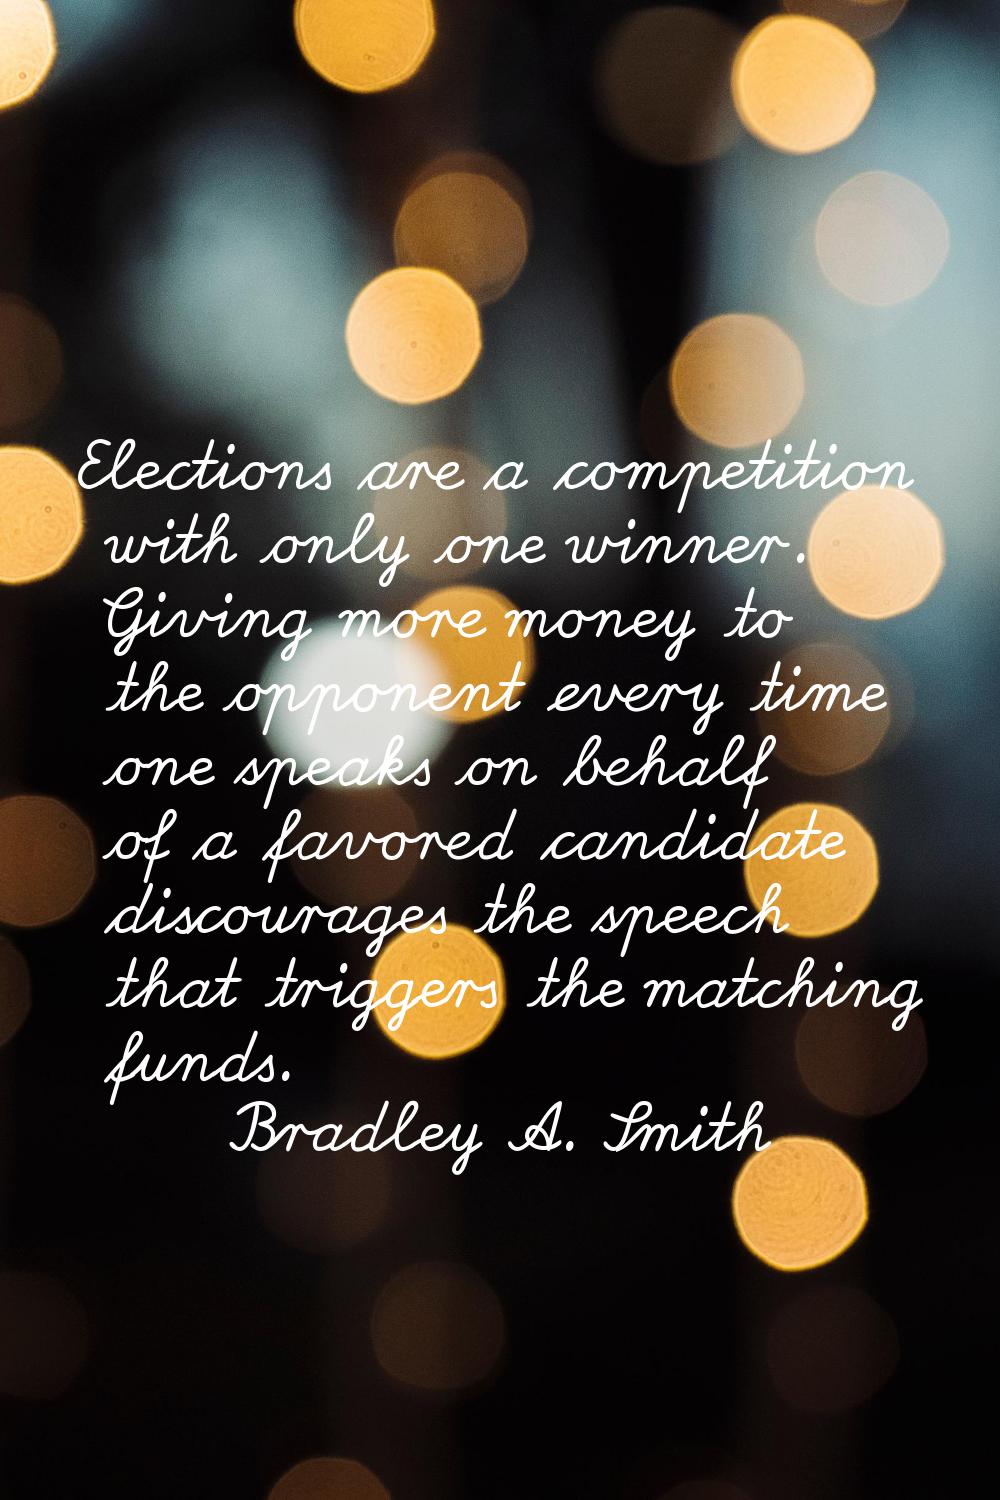 Elections are a competition with only one winner. Giving more money to the opponent every time one 